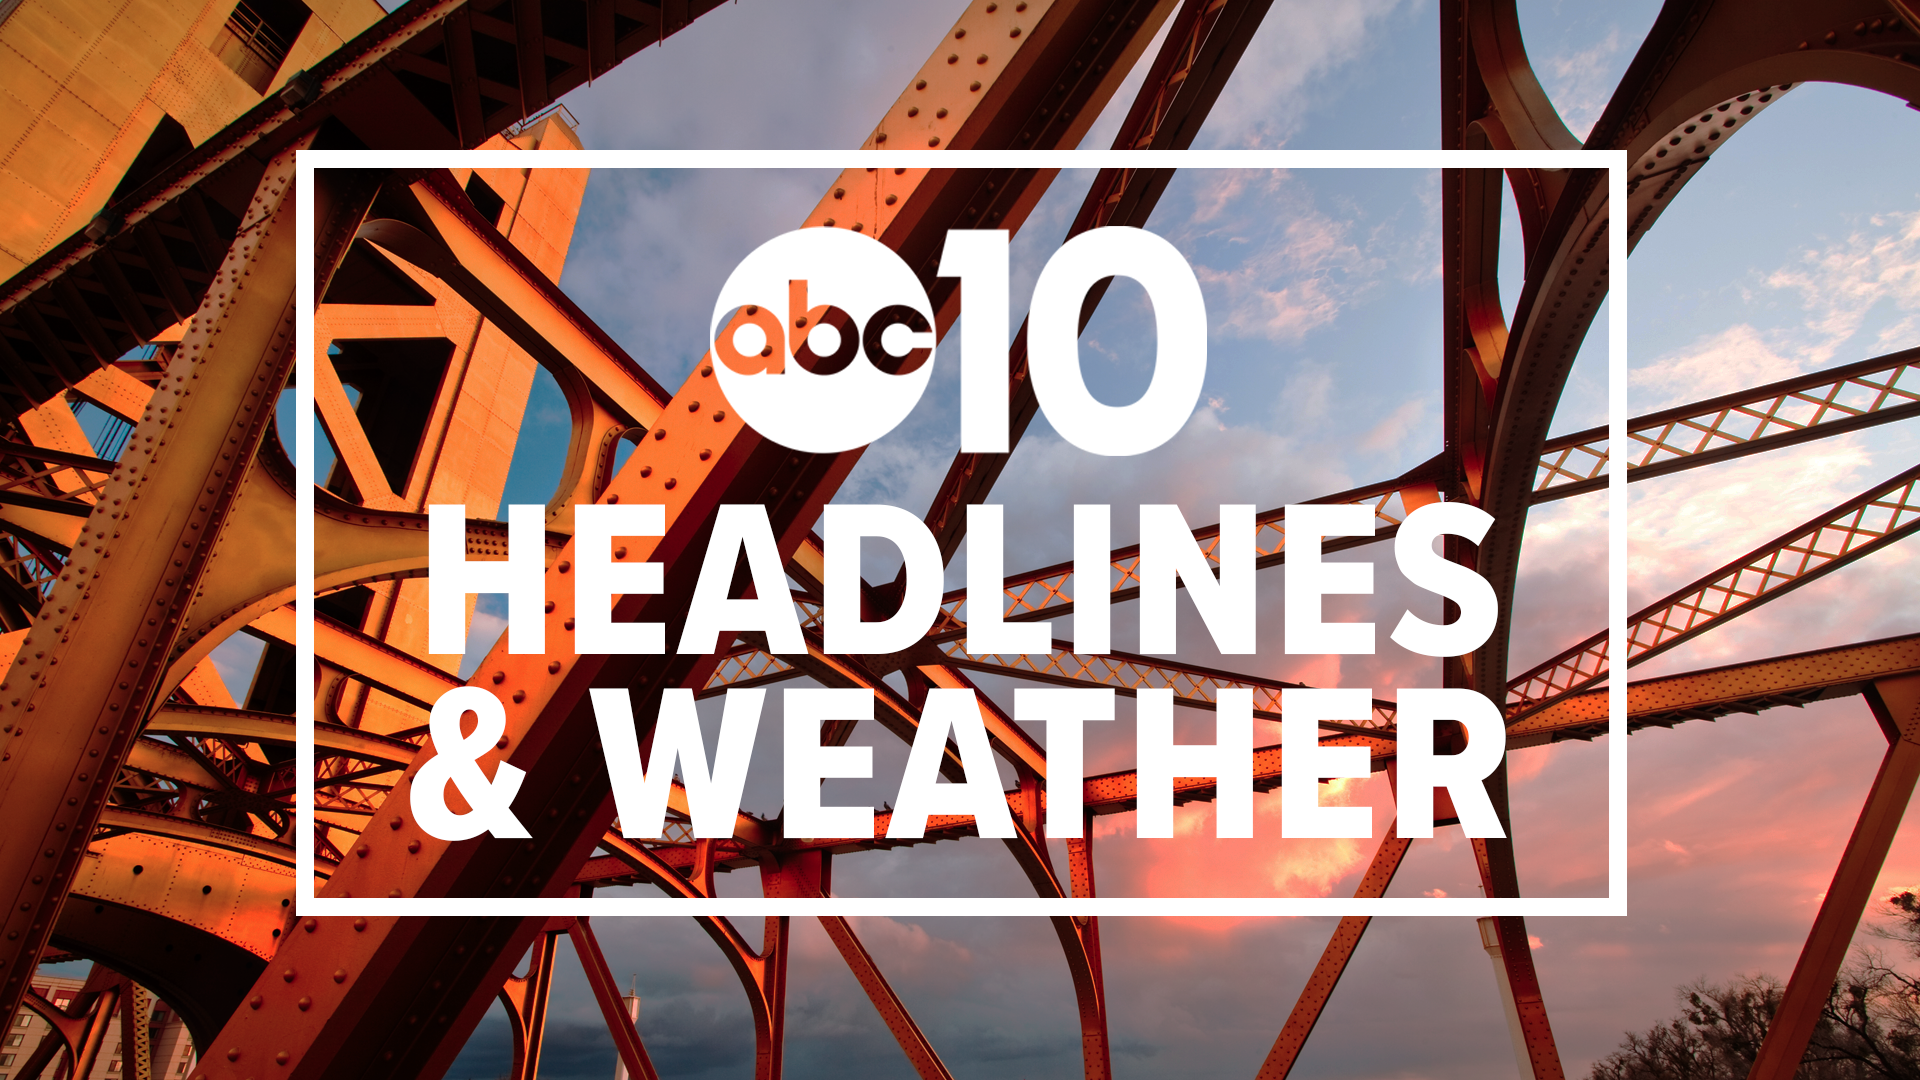 Evening Headlines: October 14, 2019 | Catch in-depth reporting on #LateNewsTonight at 11 p.m. | The latest Sacramento news is always at www.abc10.com